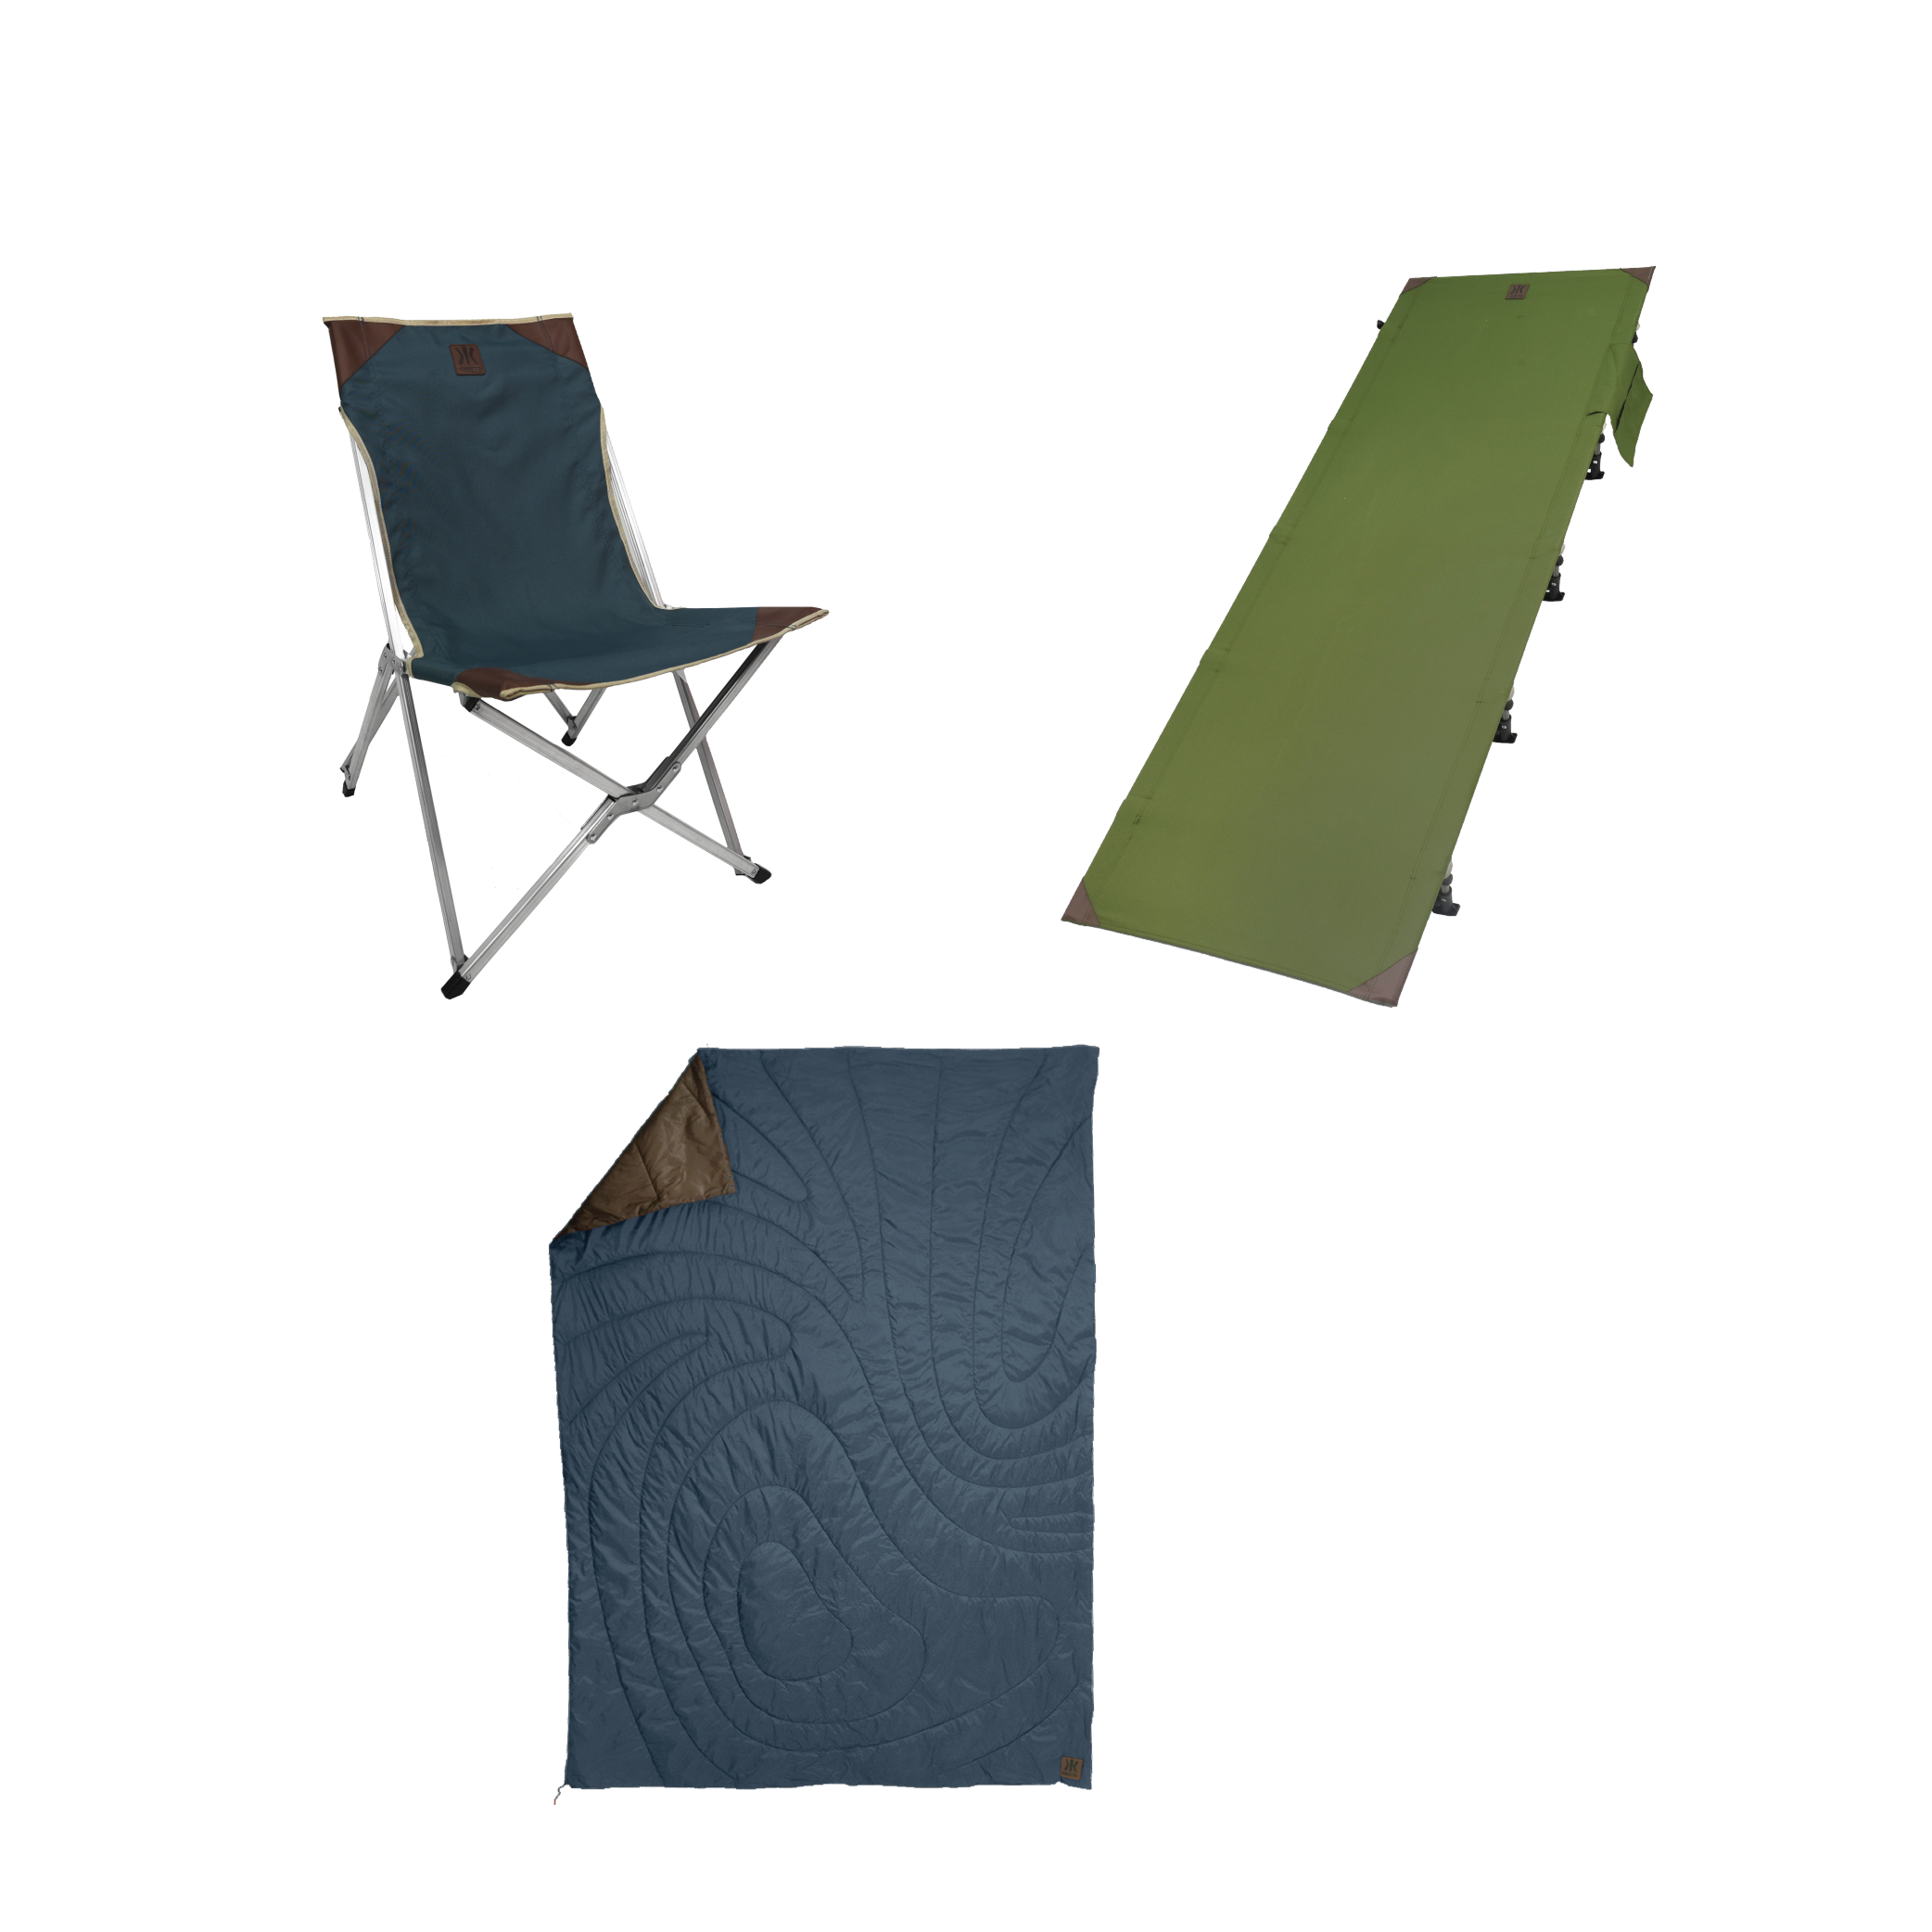 Native Bundle - Includes Comfort Chair, Camp Quilt Blanket and Ultralight Cot